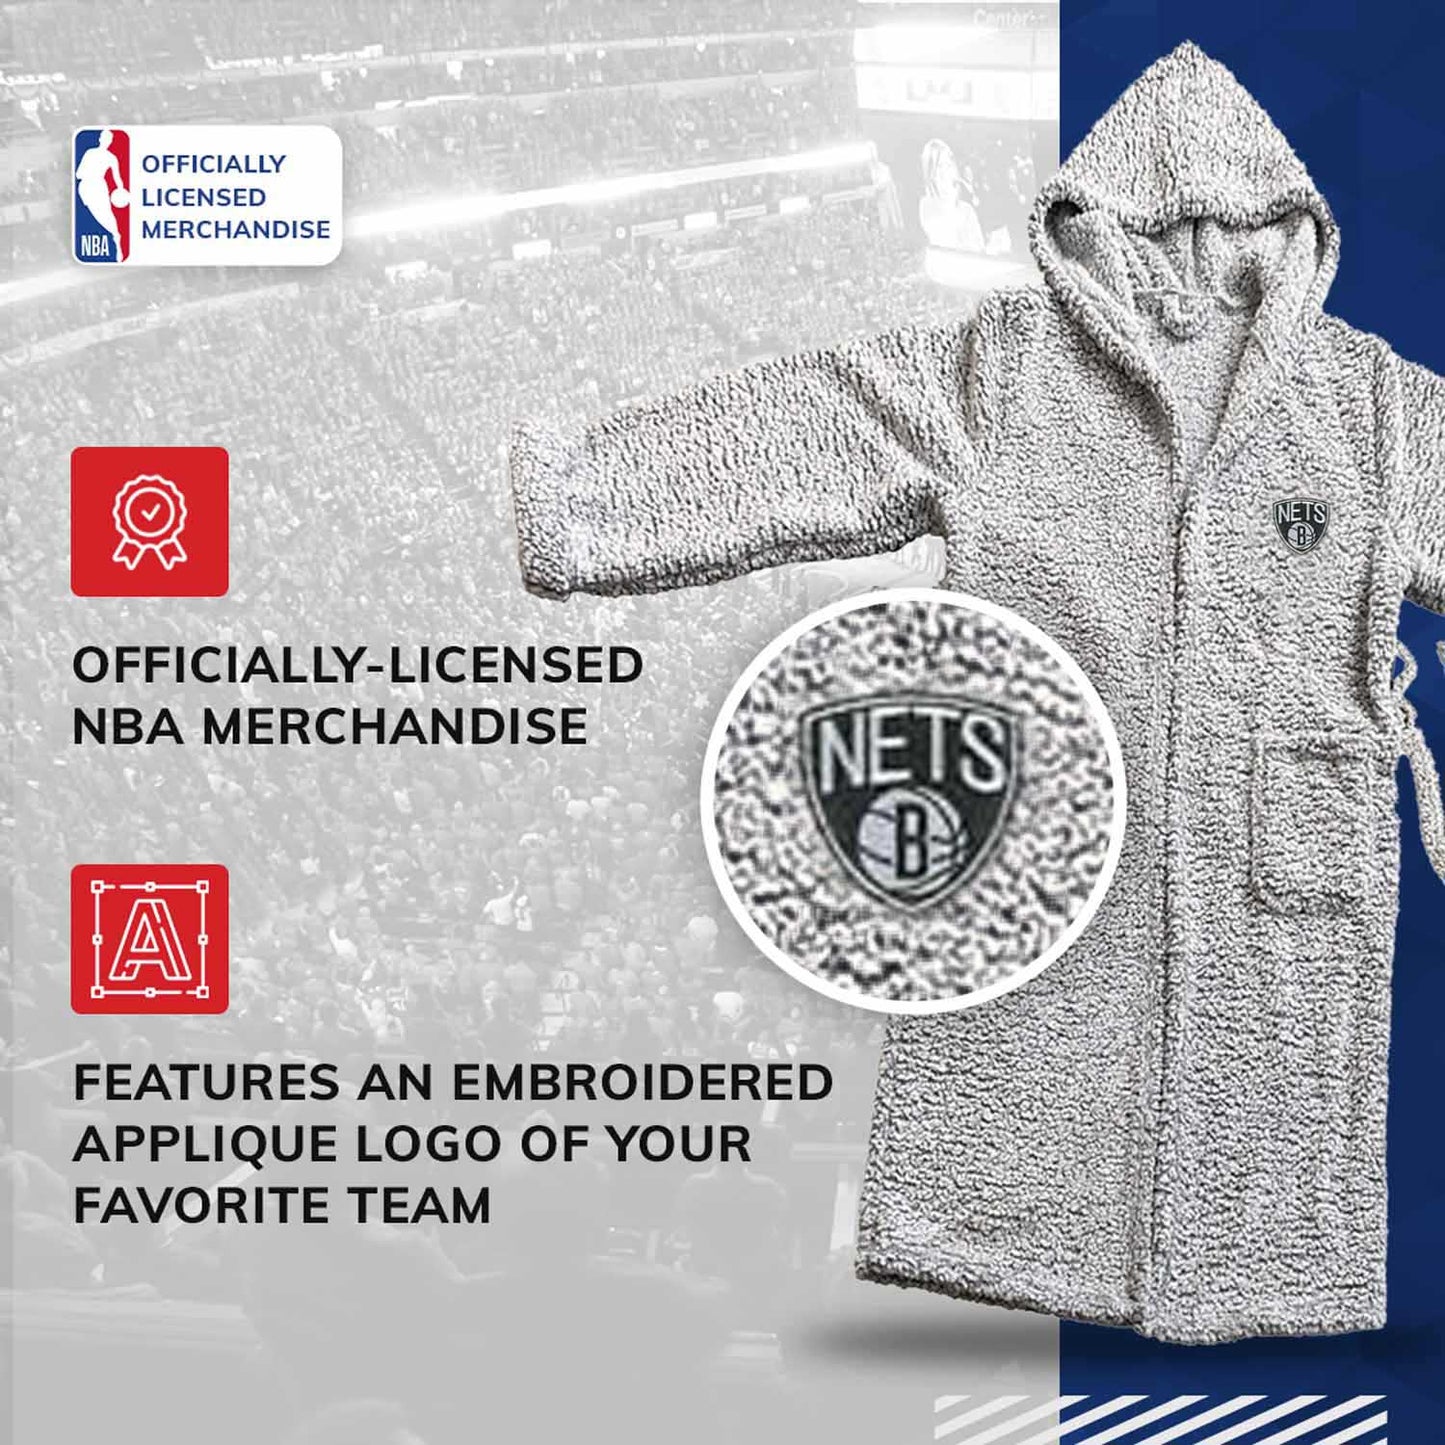 Brooklyn Nets NBA Adult Plush Hooded Robe with Pockets - Gray